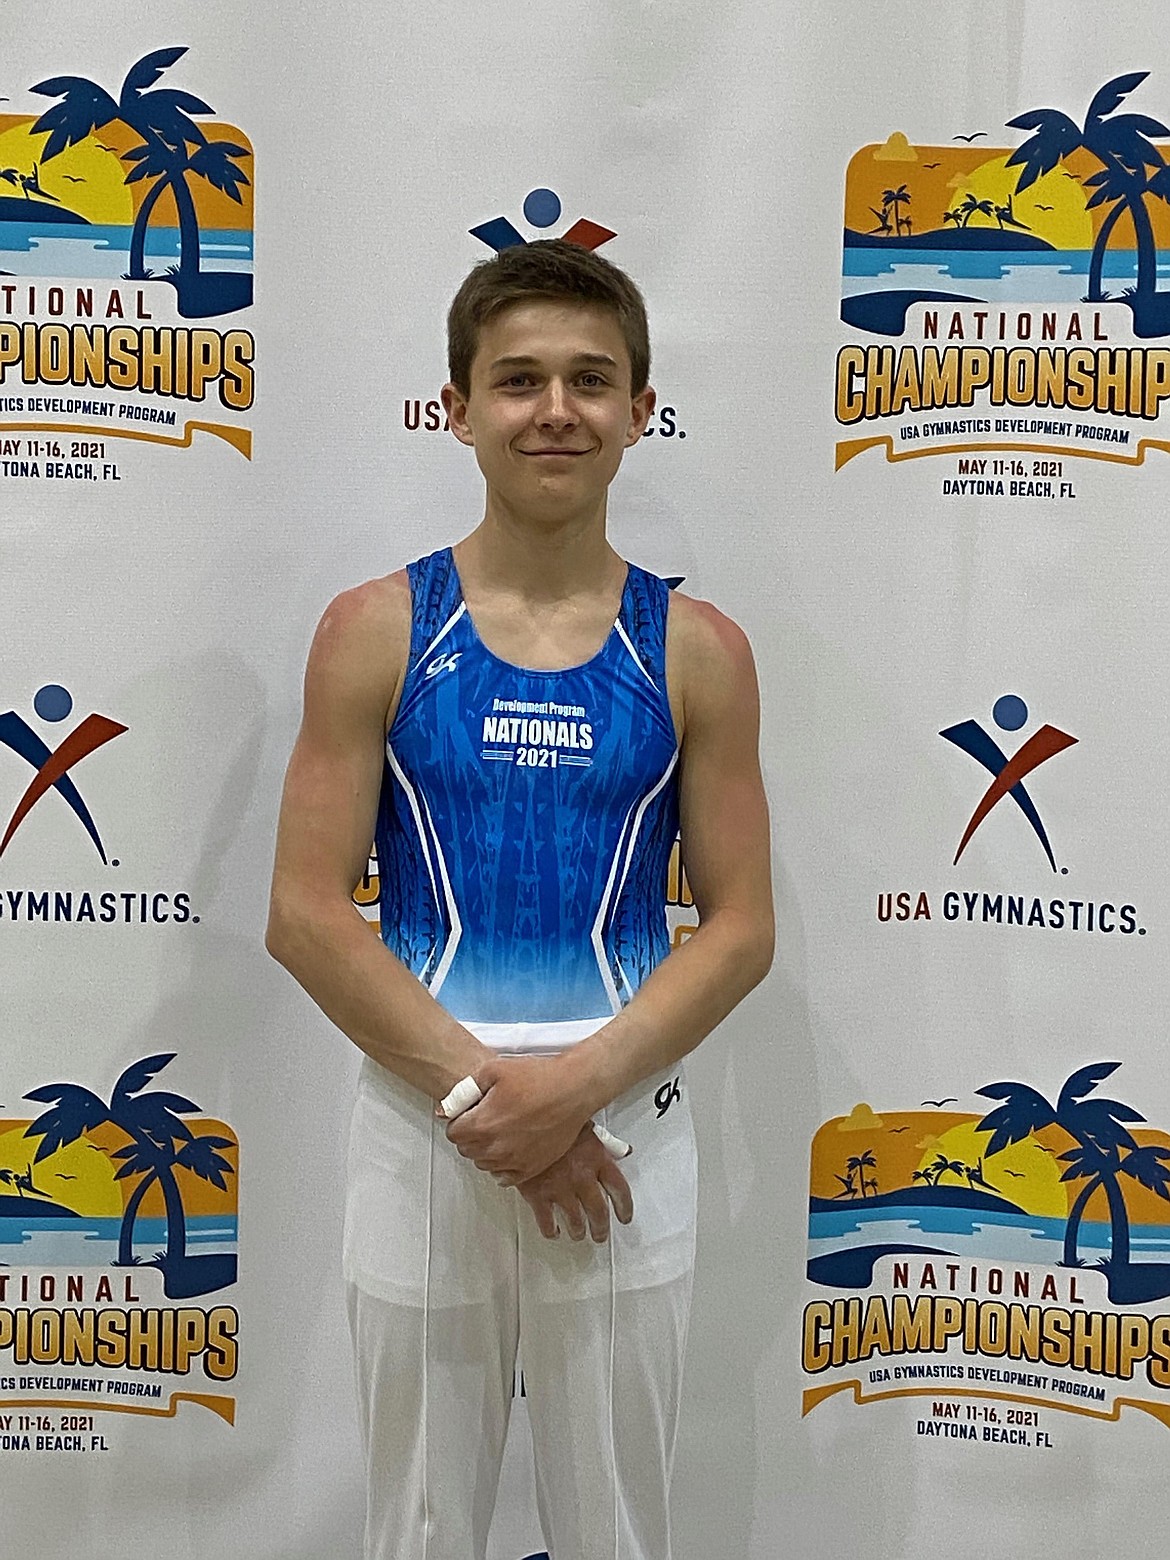 Courtesy photo
Avant Coeur Gymnastics Level 10 Caden Severtson qualified to the national championships in Daytona Beach, Fla., competing against Level 10 gymnasts from all over the United States. He had a high of 11.850 on Vault and a high of 11.300 on Rings.